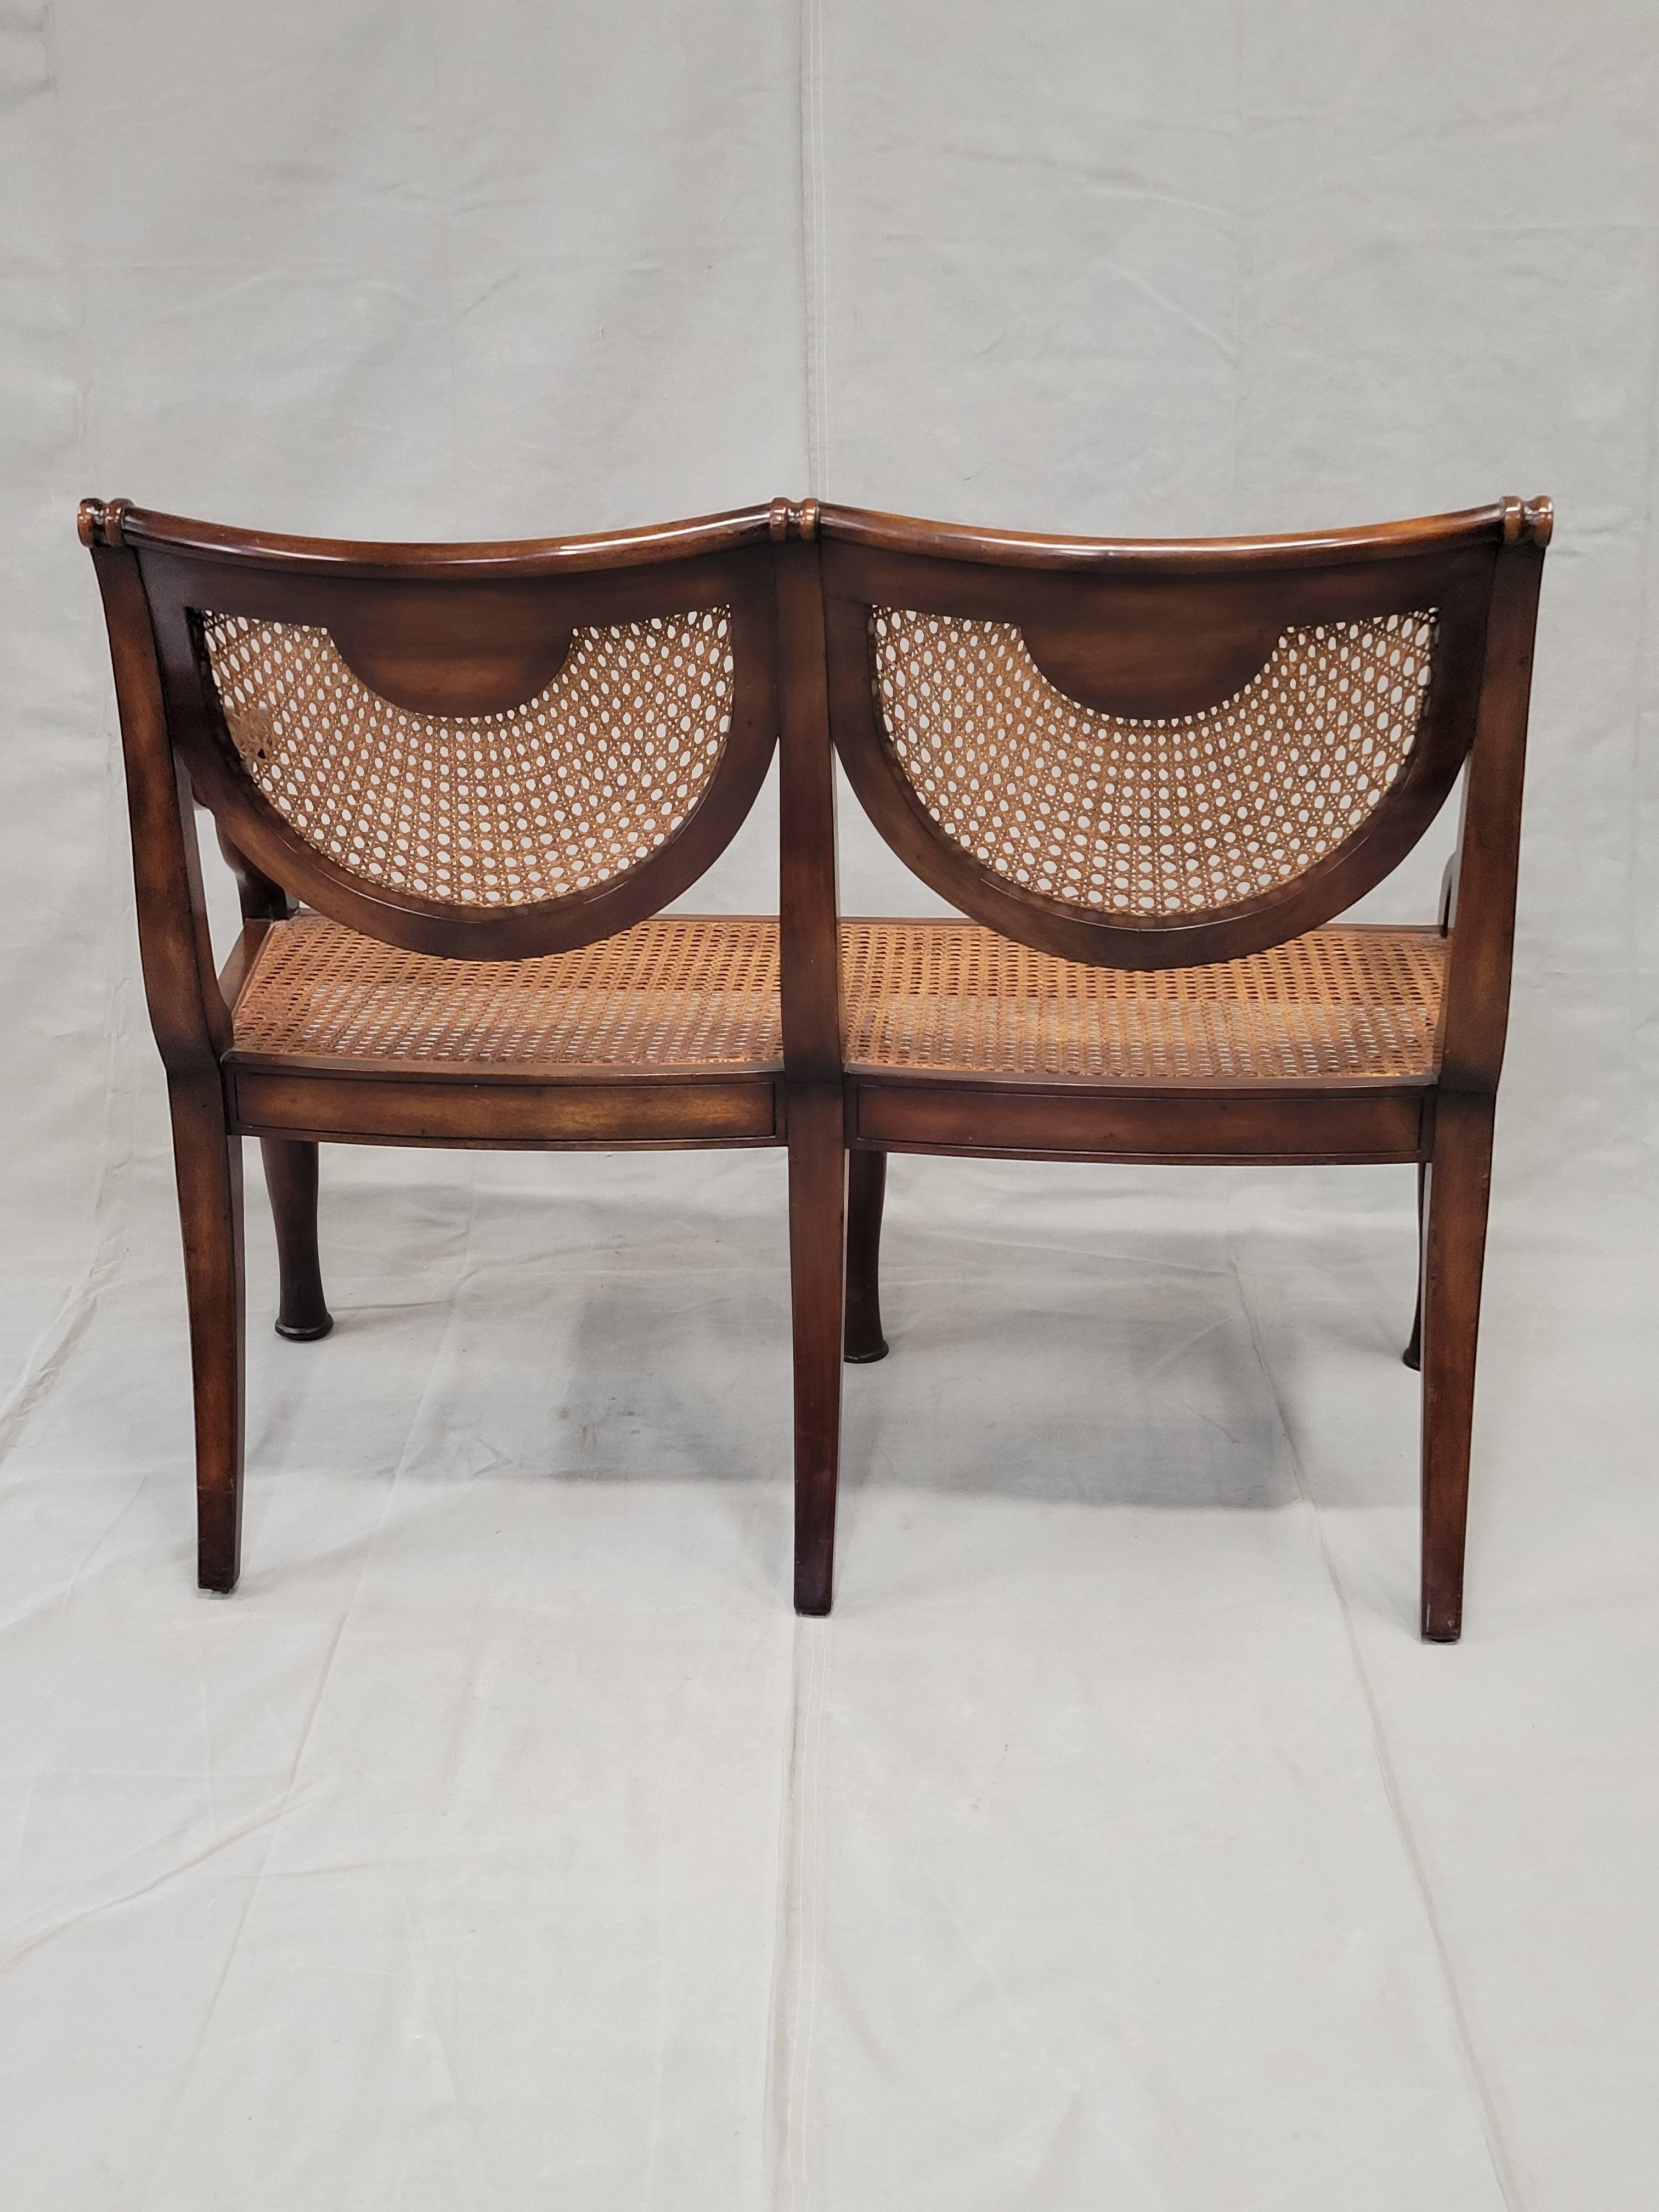 Vintage Theodore Alexander Regency Caned Mahogany Settee With Down Cushion For Sale 6